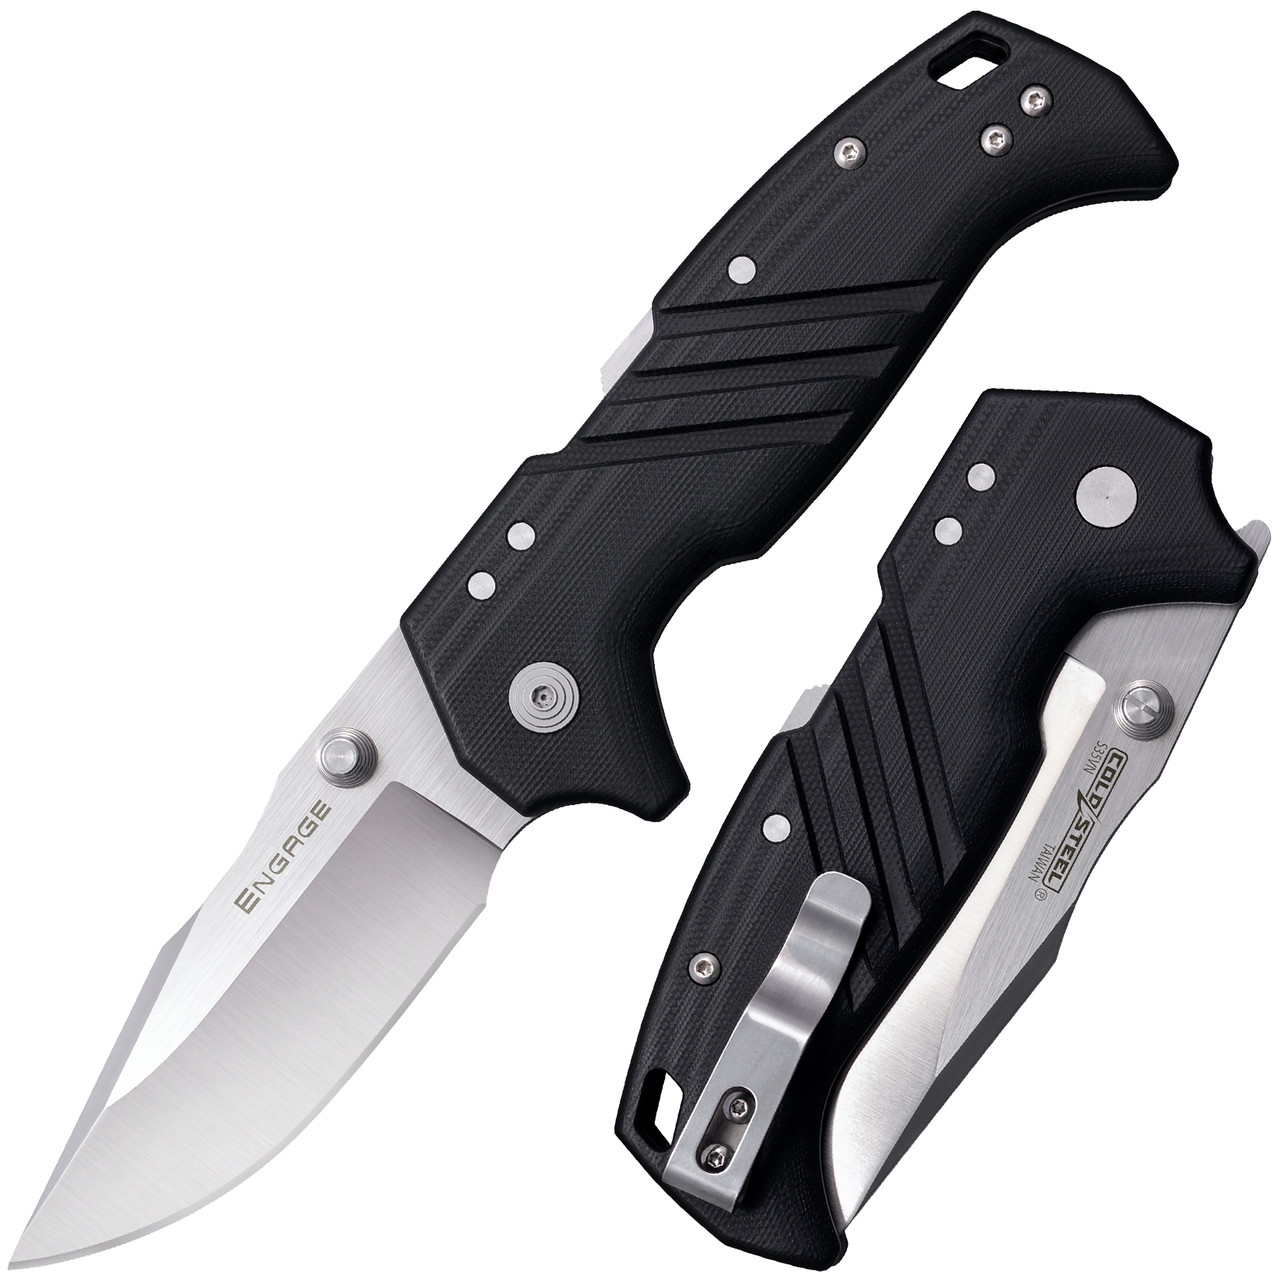 COLD STEEL ENGAGE FOLDING KNIFE | Cold Steel Knives